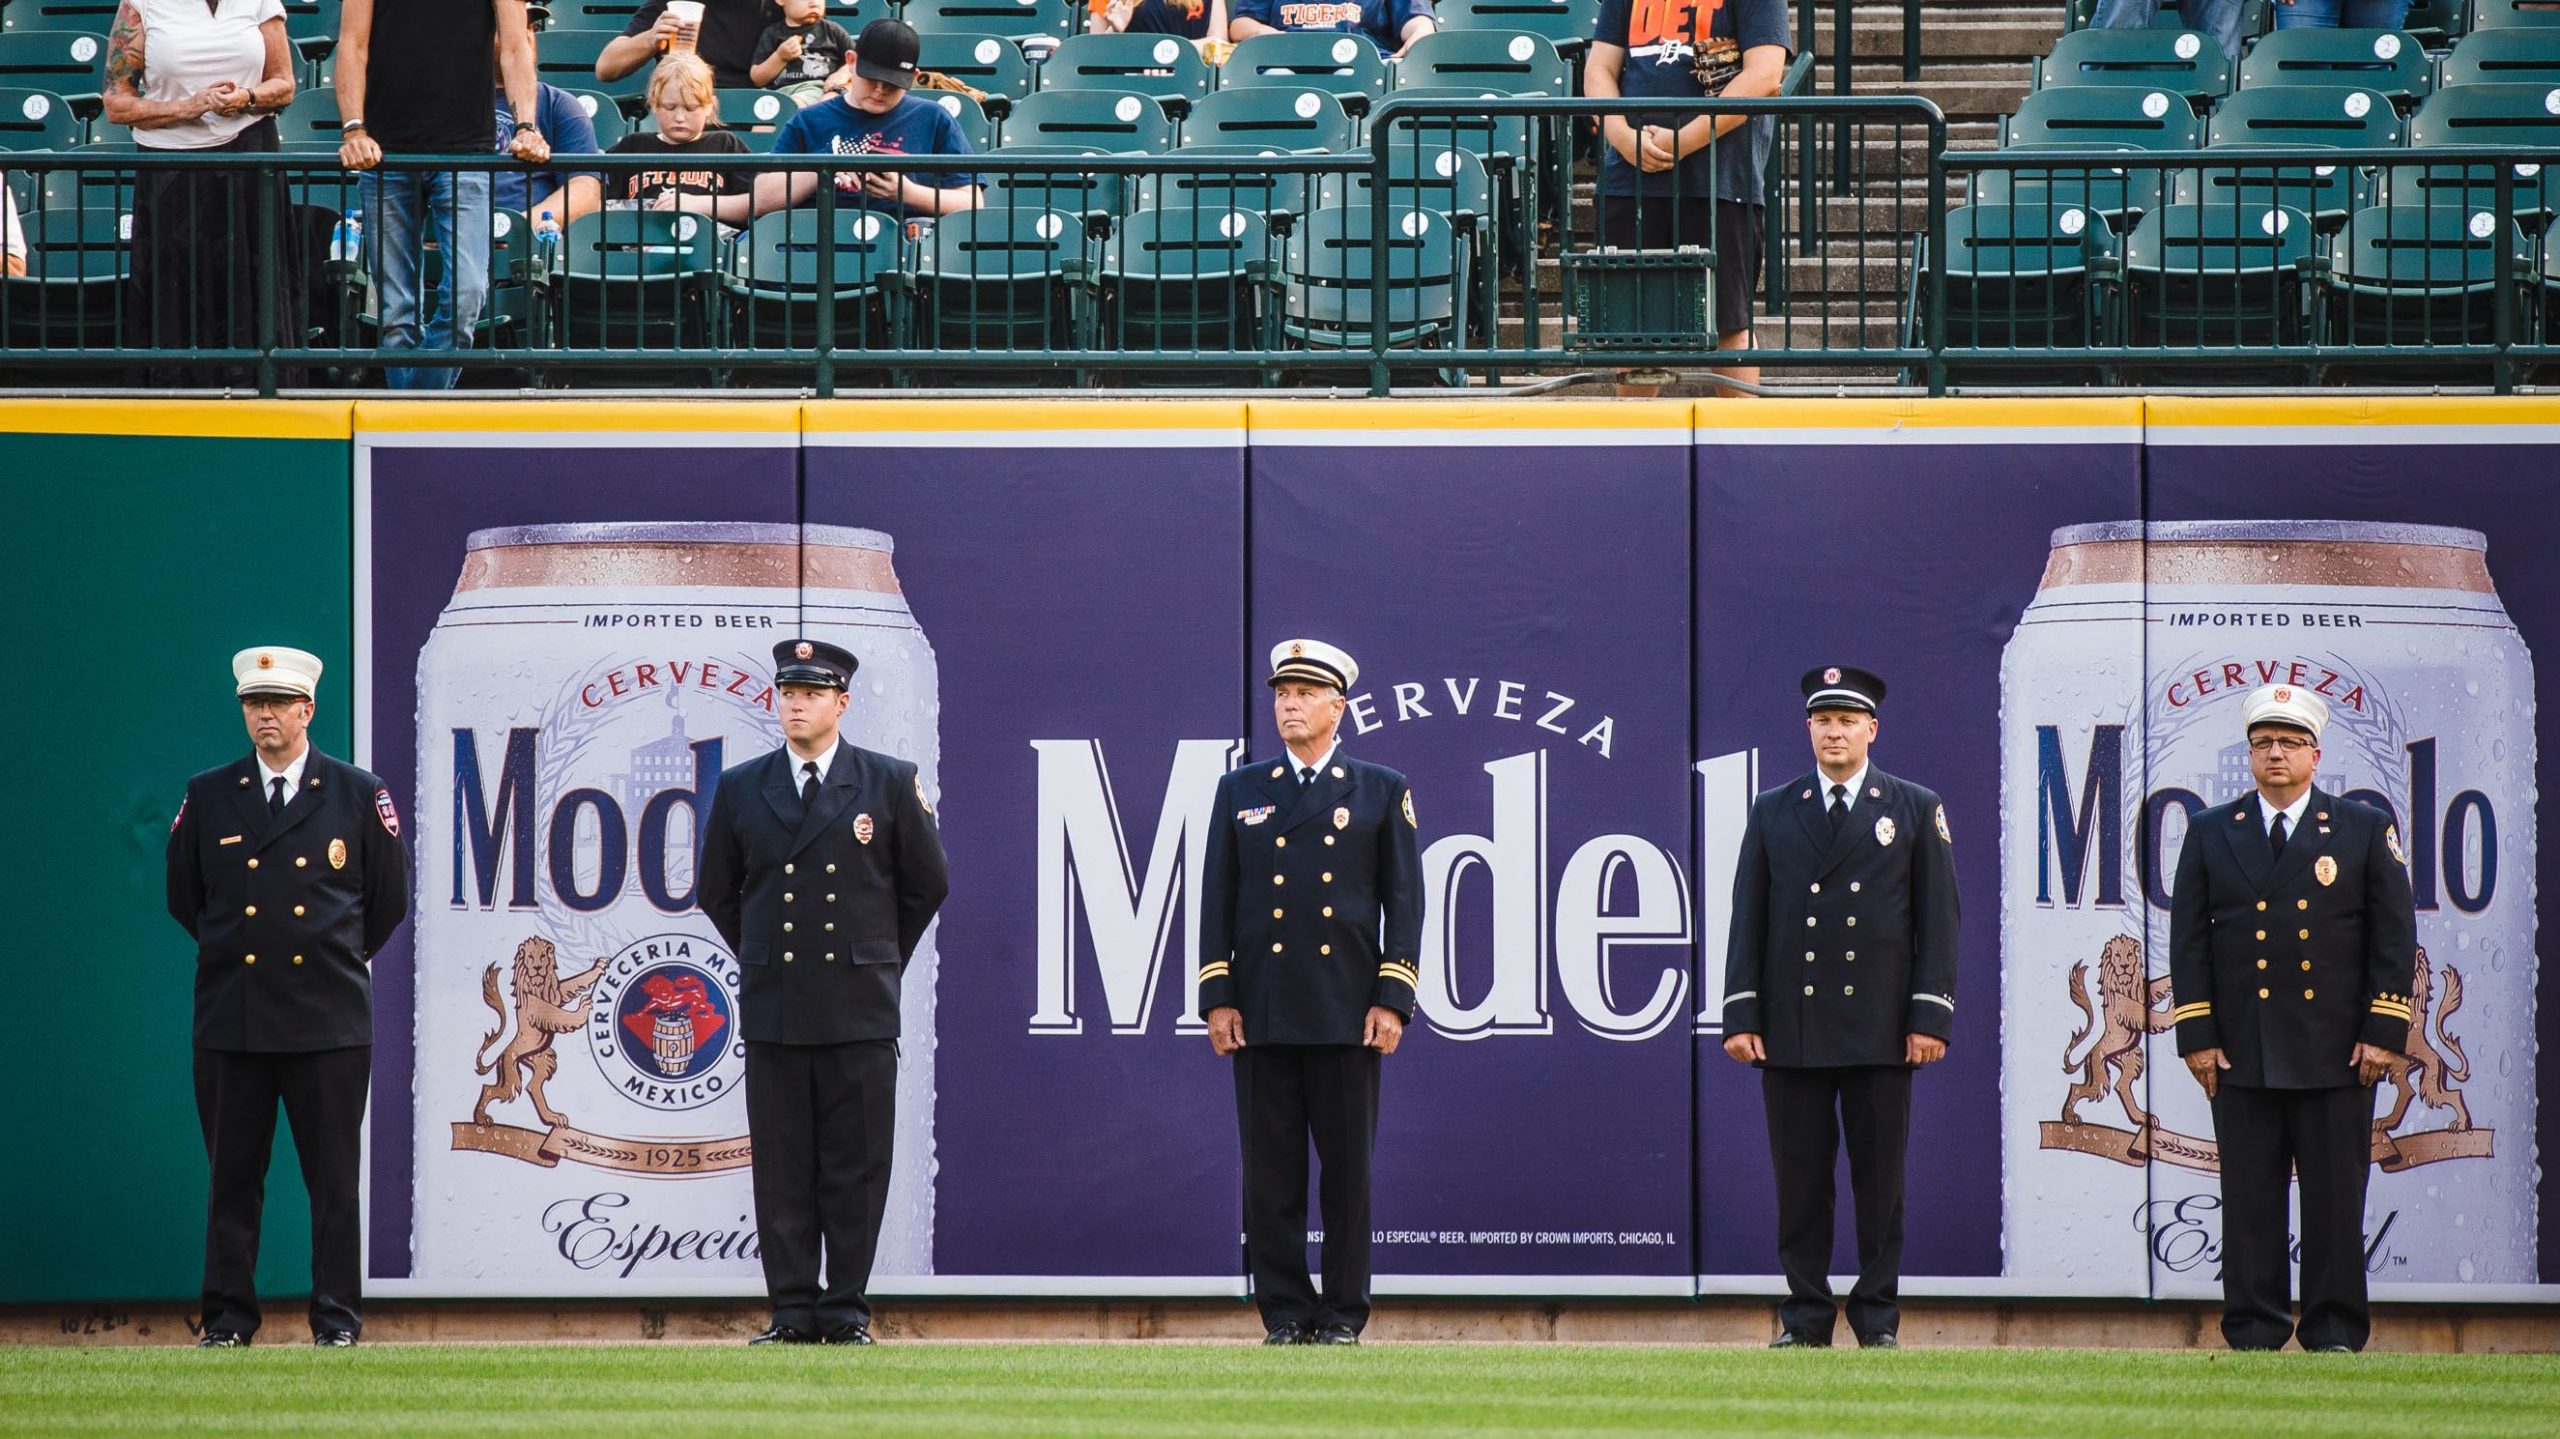 Tigers And Belfor Property Restoration Recognized Local First Responder Heroes On th Anniversary Of 9 11 At Comerica Park Ilitch Companies News Hub